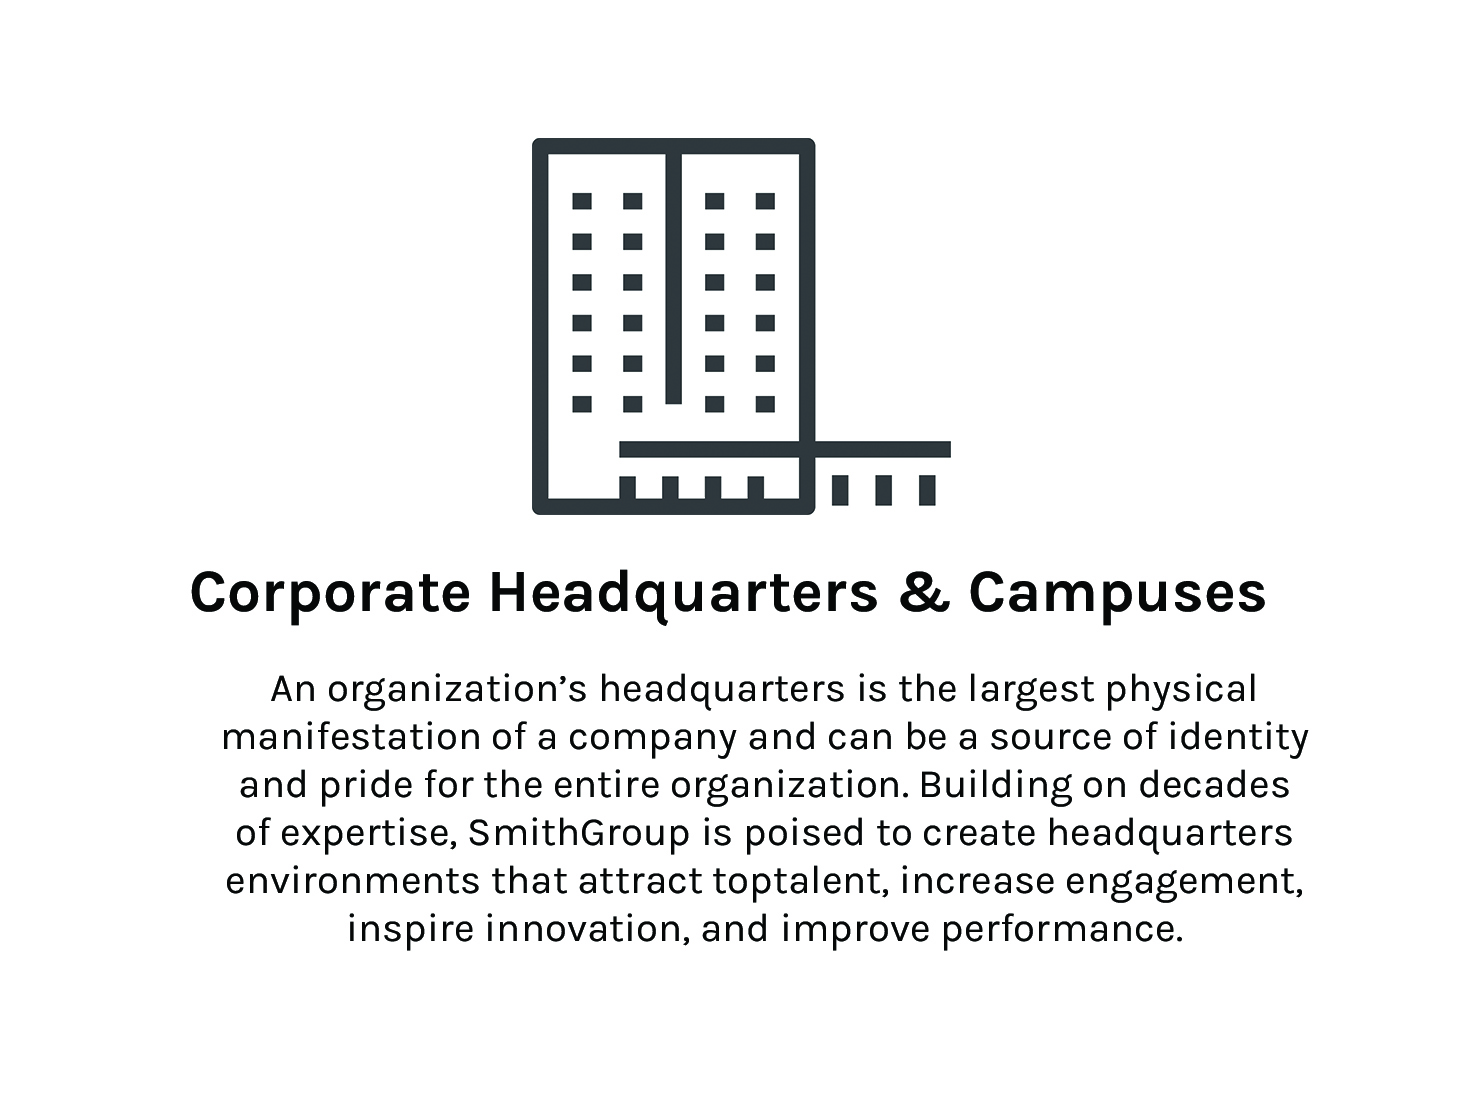 Corporate Headquarters and Campuses SmithGroup Workplace Market